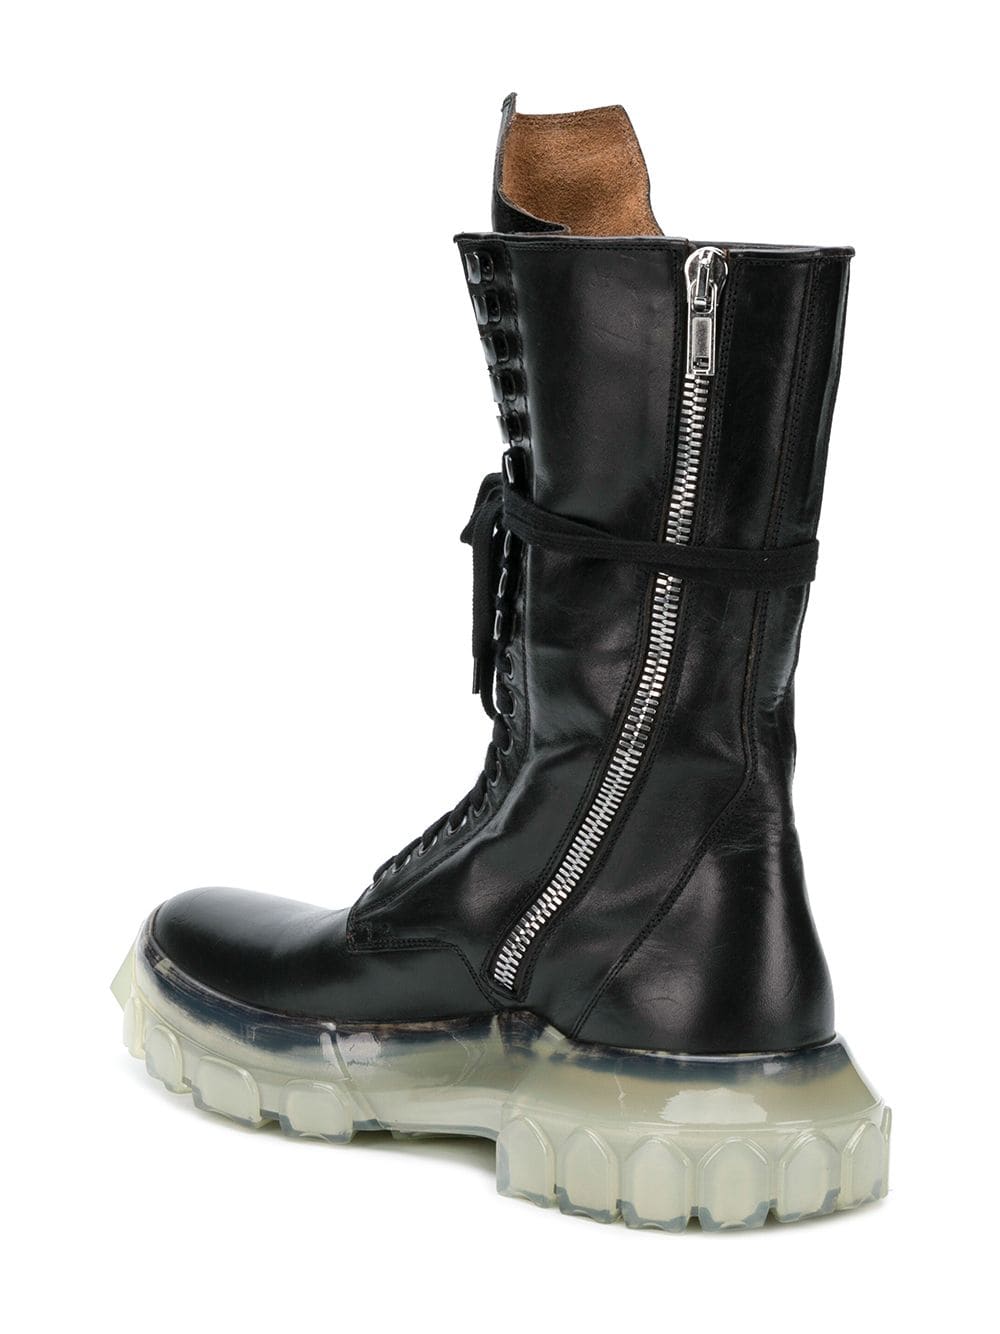 Rick owens tractor. Rick Owens tractor Boots Lace. Bozo tractor Rick Owens. Сапоги Рик Оуэнс мужские. Rick Owens Yeti Boots.